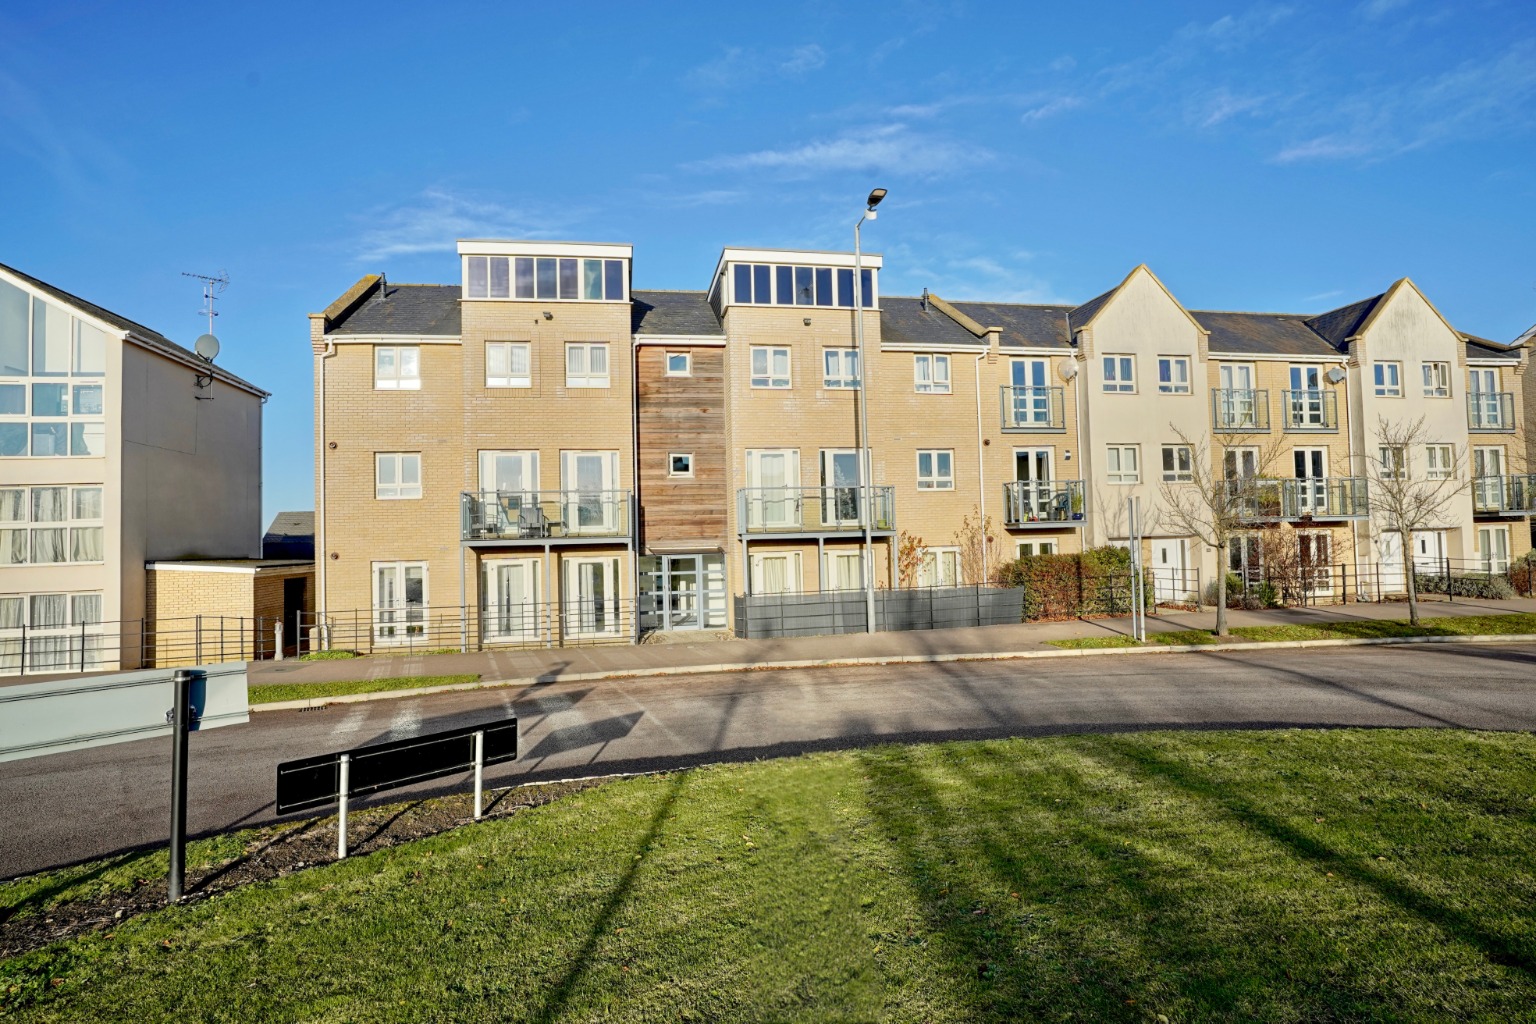 Situated on the outskirts of the ever popular Loves Farm estate this TWO BEDROOM, FIRST FLOOR APARTMENT provides the perfect opportunity for a number of buyers. The open plan lounge, kitchen, dining area provide a real sense of space, the lounge provides access to a balcony that can comfortably...